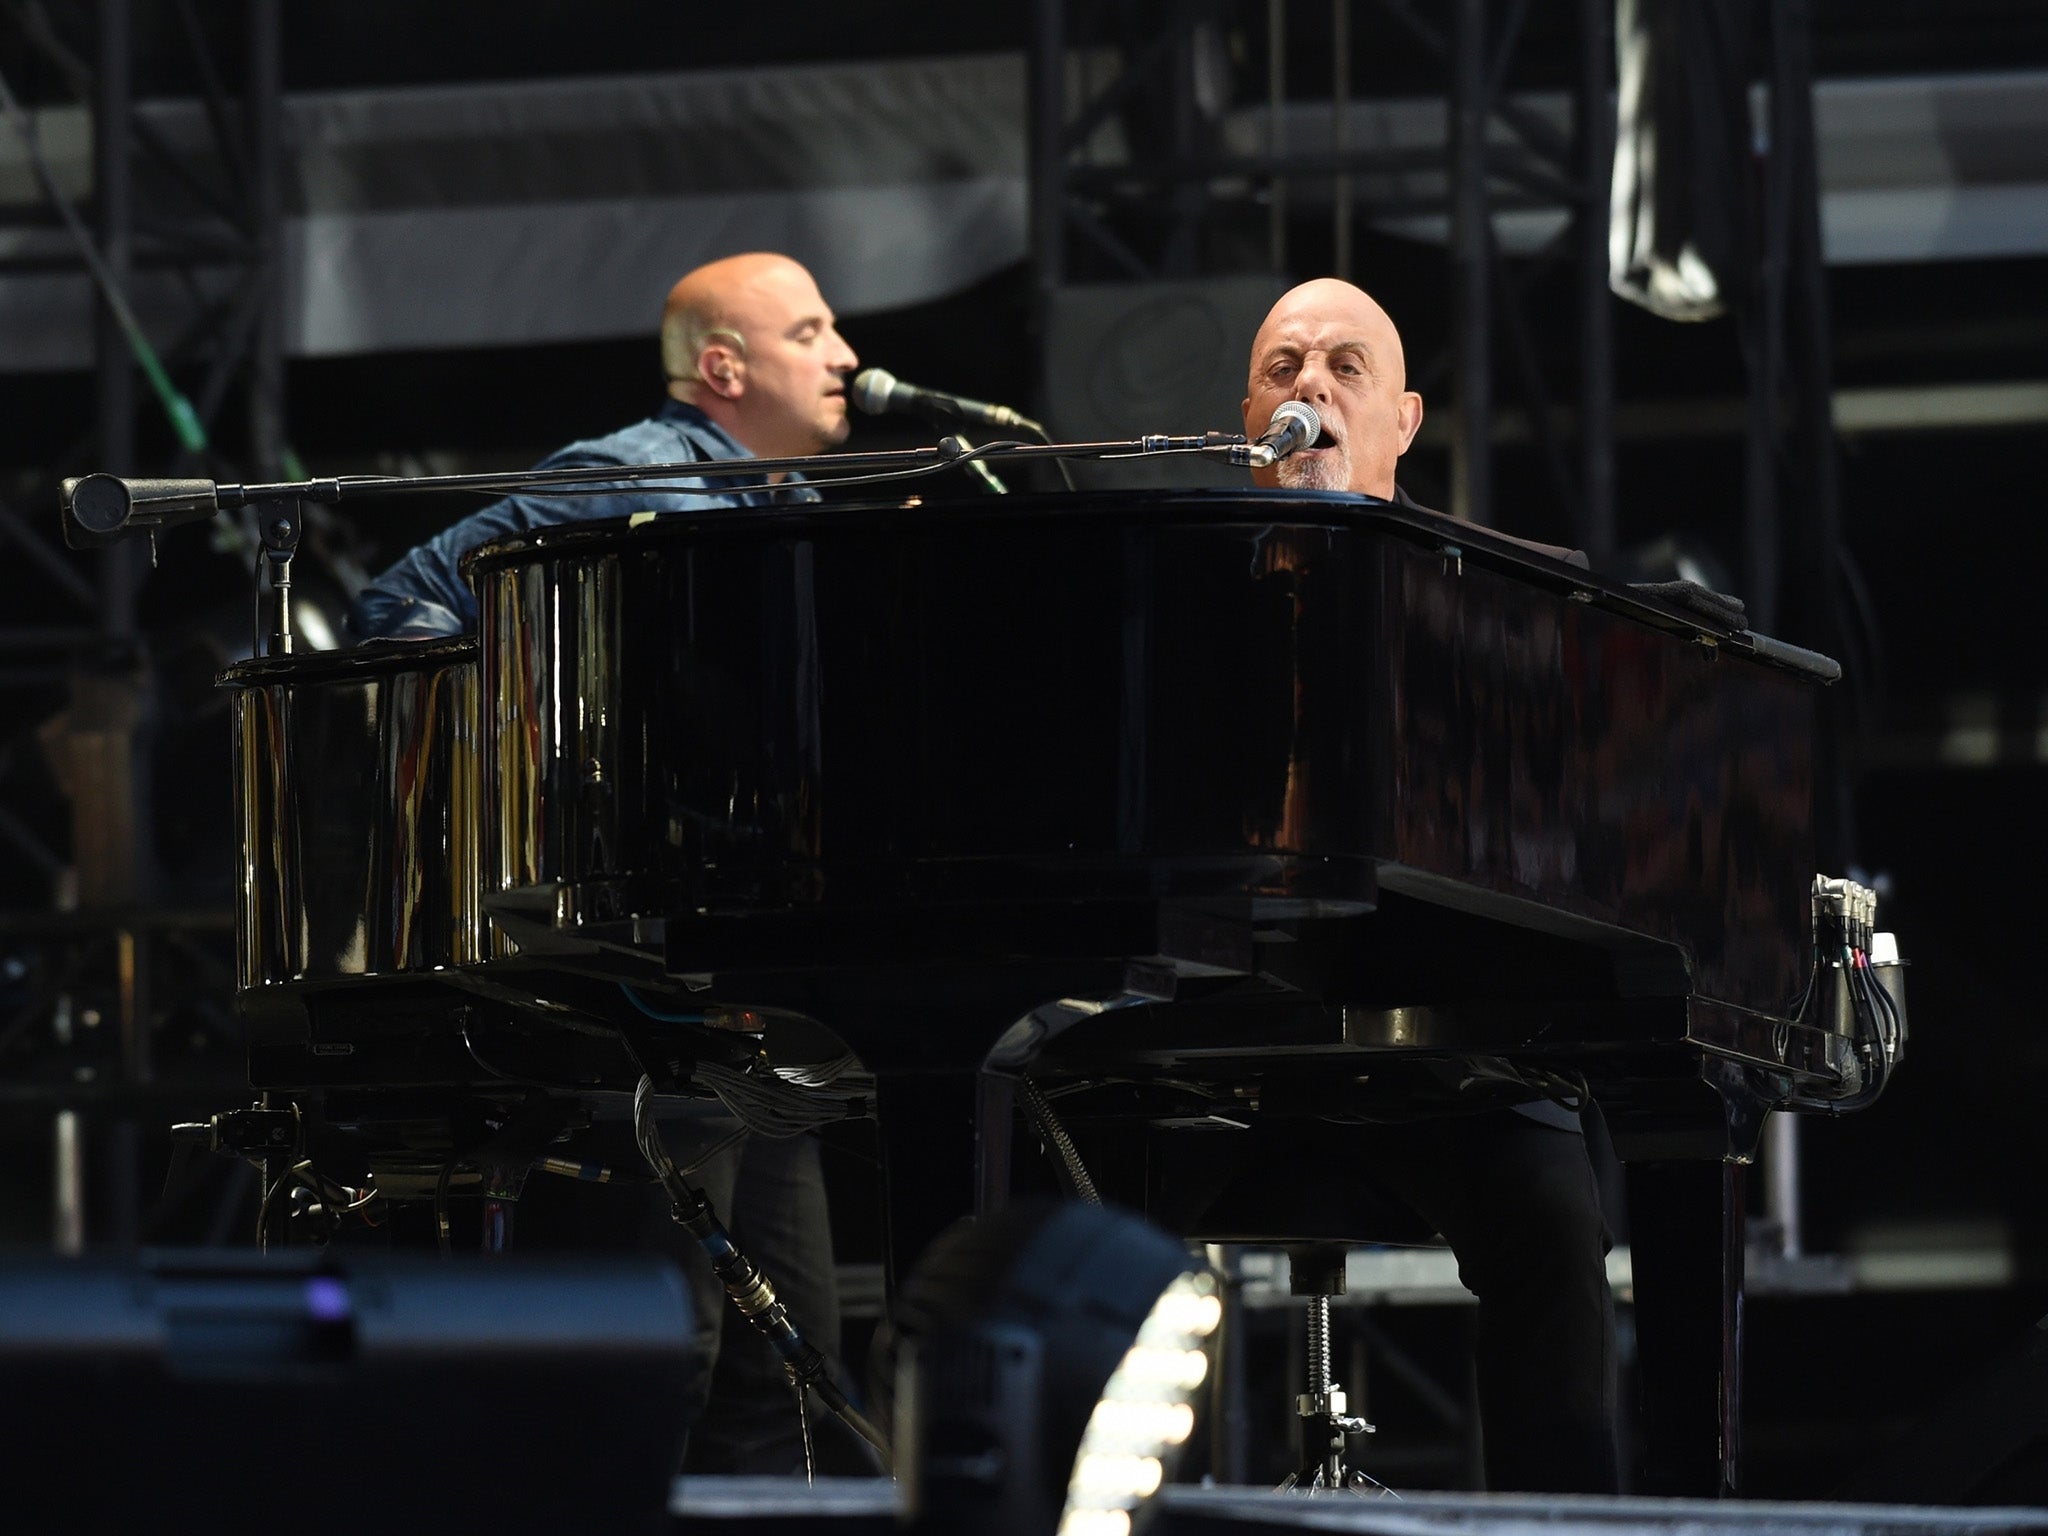 Billy Joel performing to a sell out crowd at Old Trafford Football Ground in Manchester